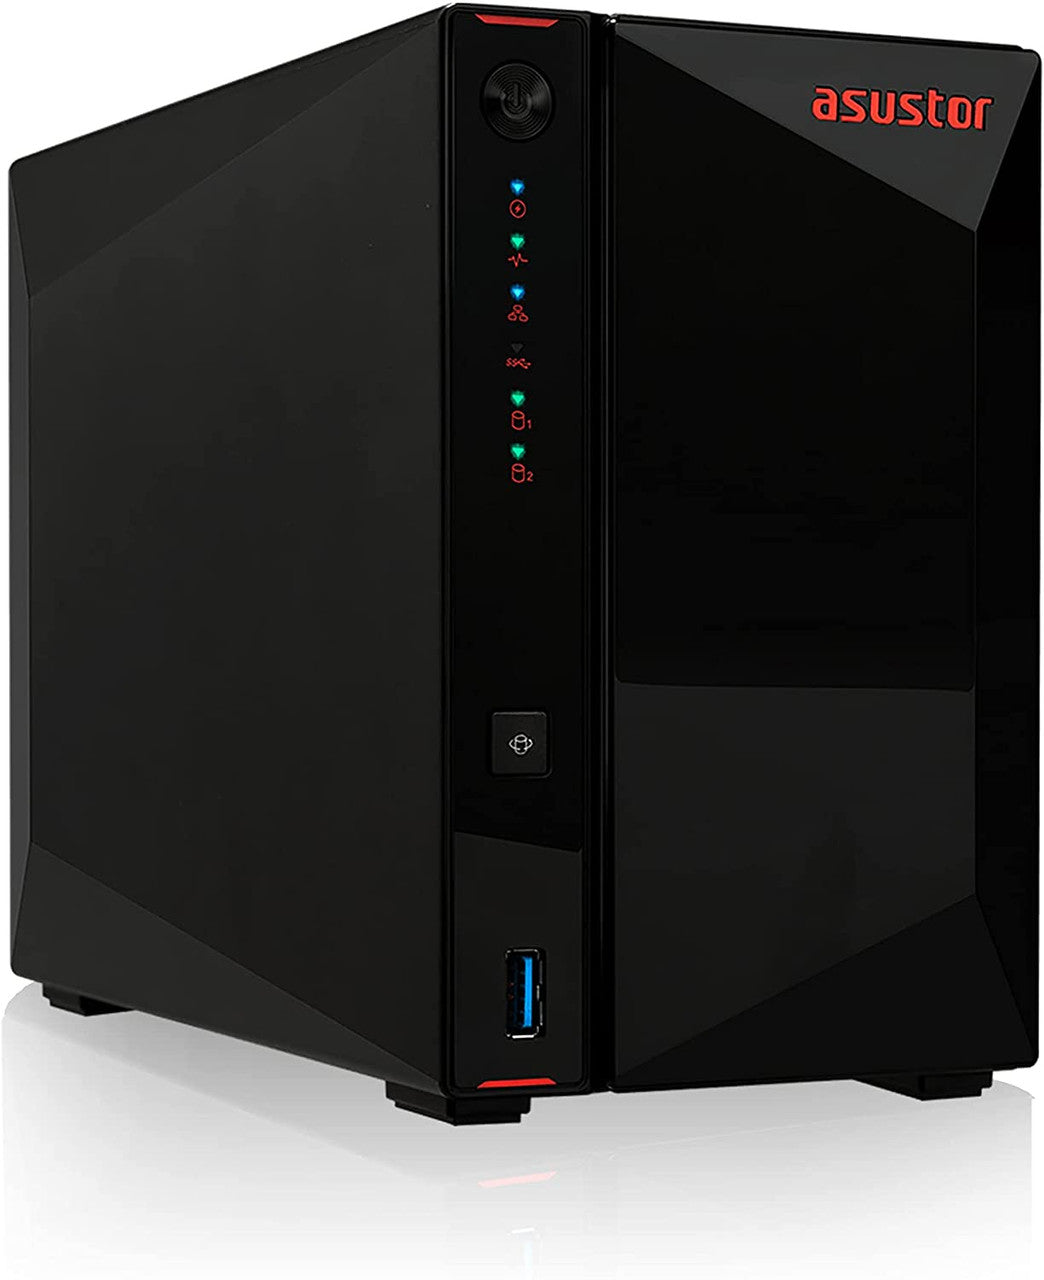 Asustor AS5202T 2-Bay Nimbustor 2 NAS with 2GB RAM and 44TB (2 x 22TB) Seagate Ironwolf PRO Drives Fully Assembled and Tested